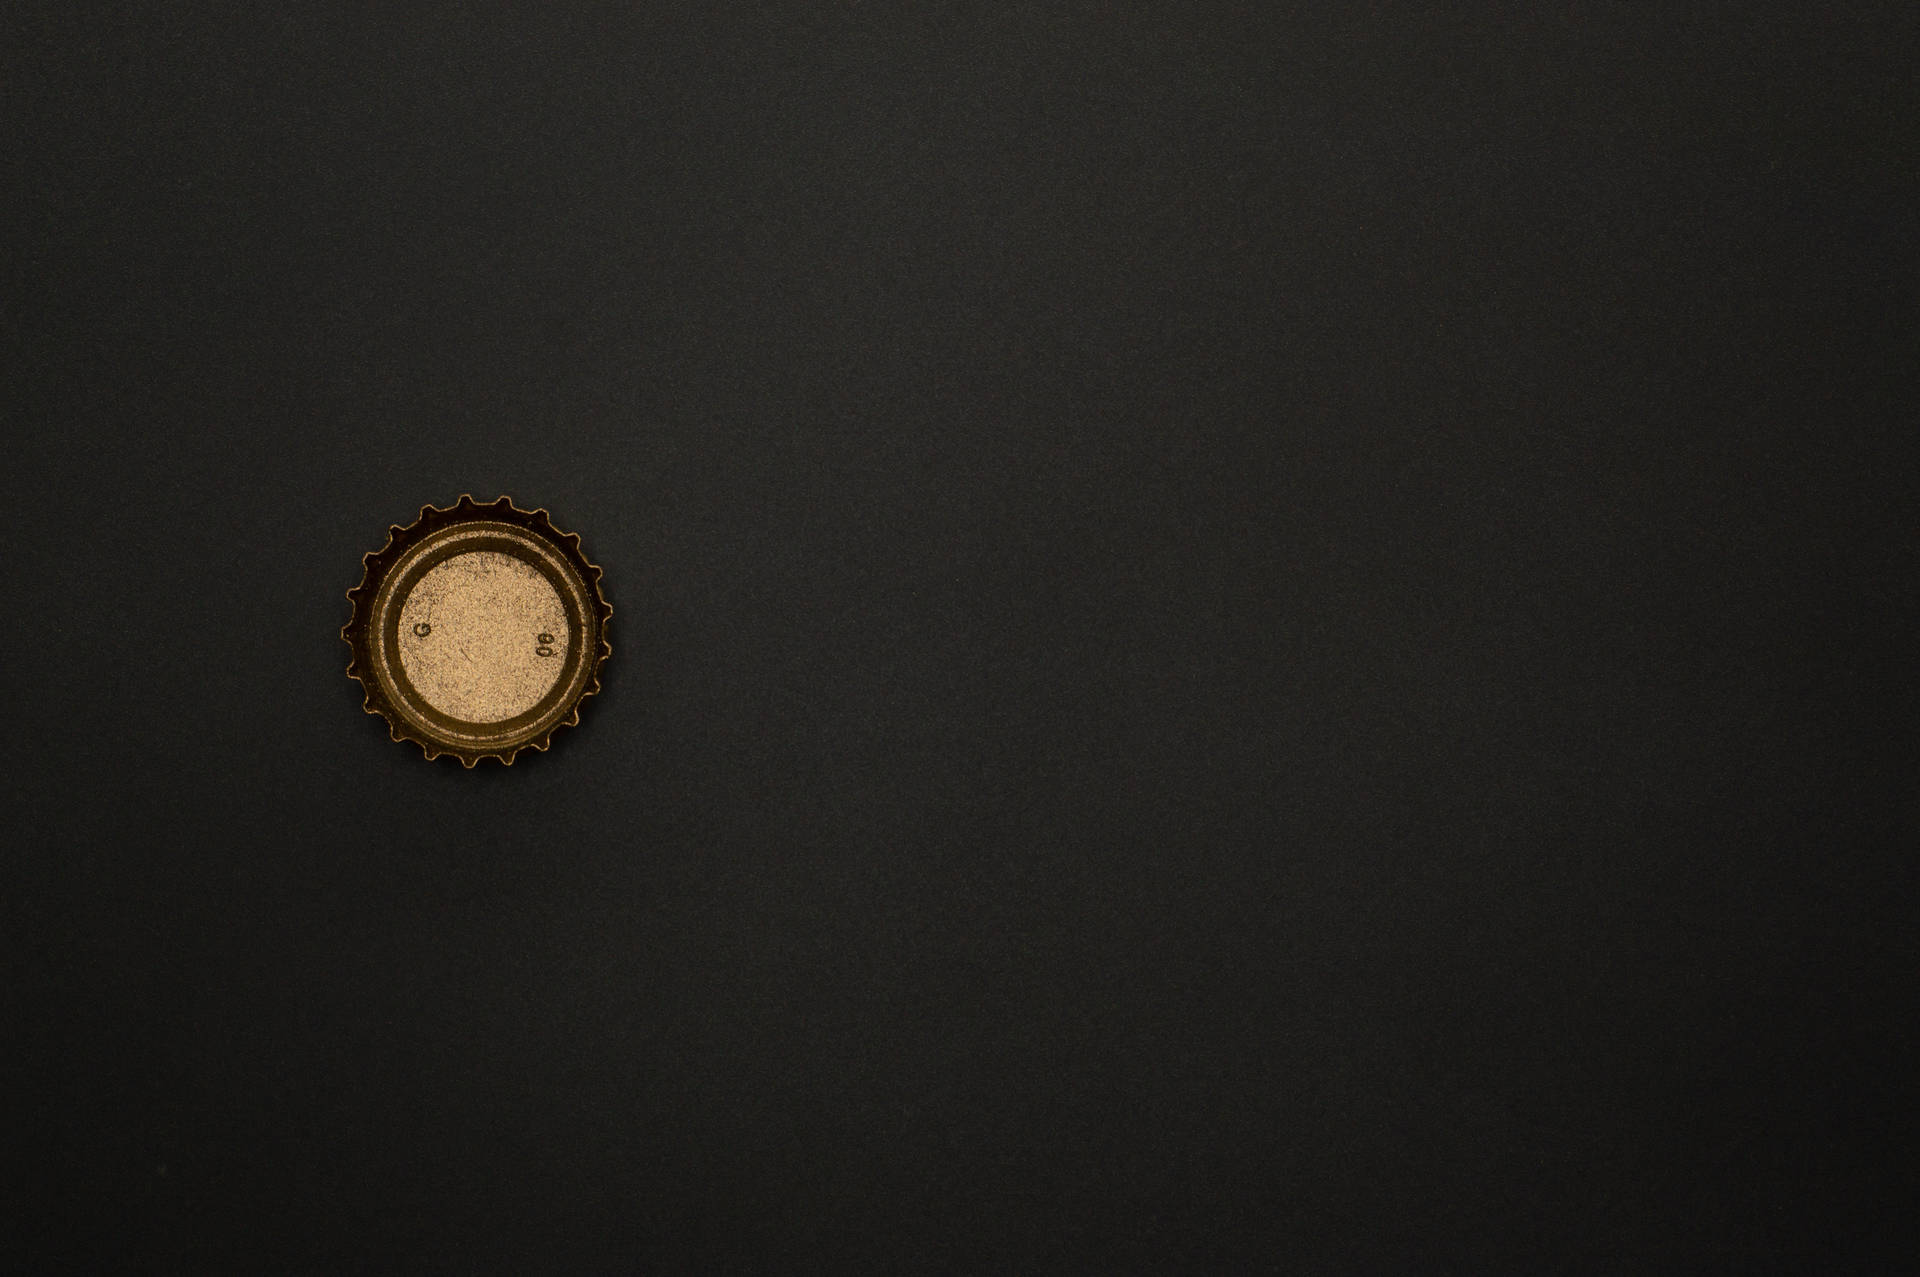 Bottle Cap Black And Gold Iphone Wallpaper